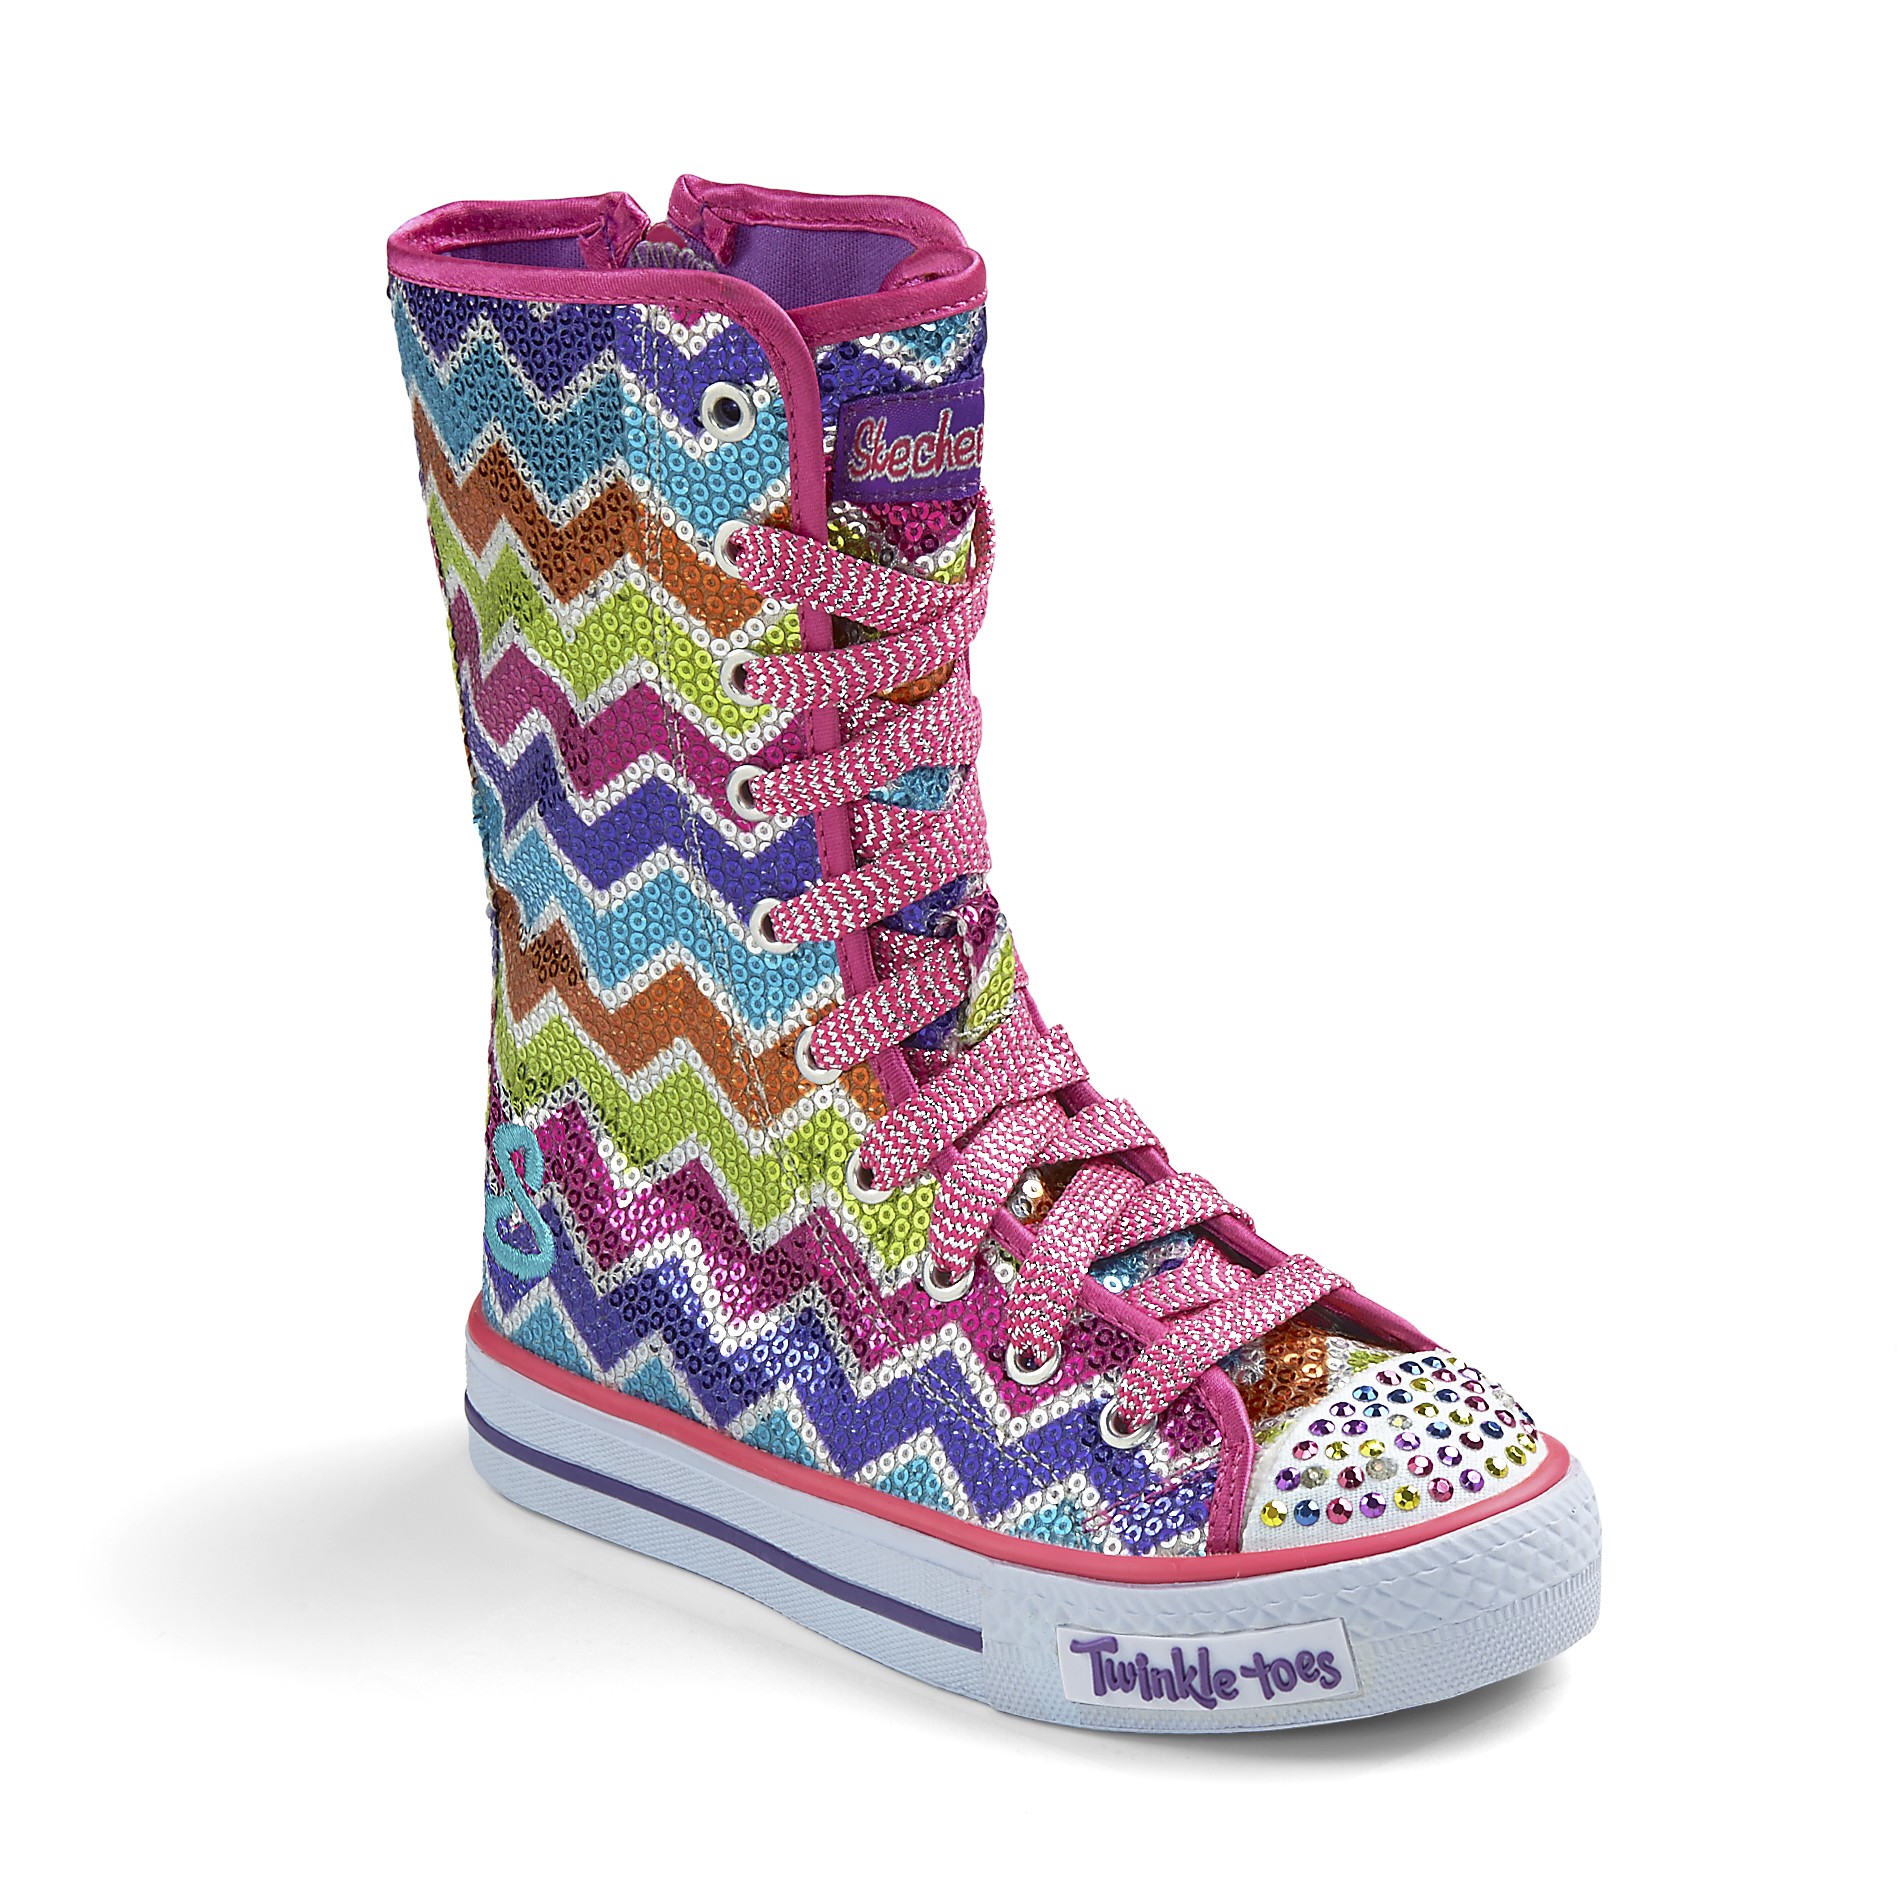 Skechers Girl's Classy Sassy Pink/Multi Sequined Super High-Top Shoe